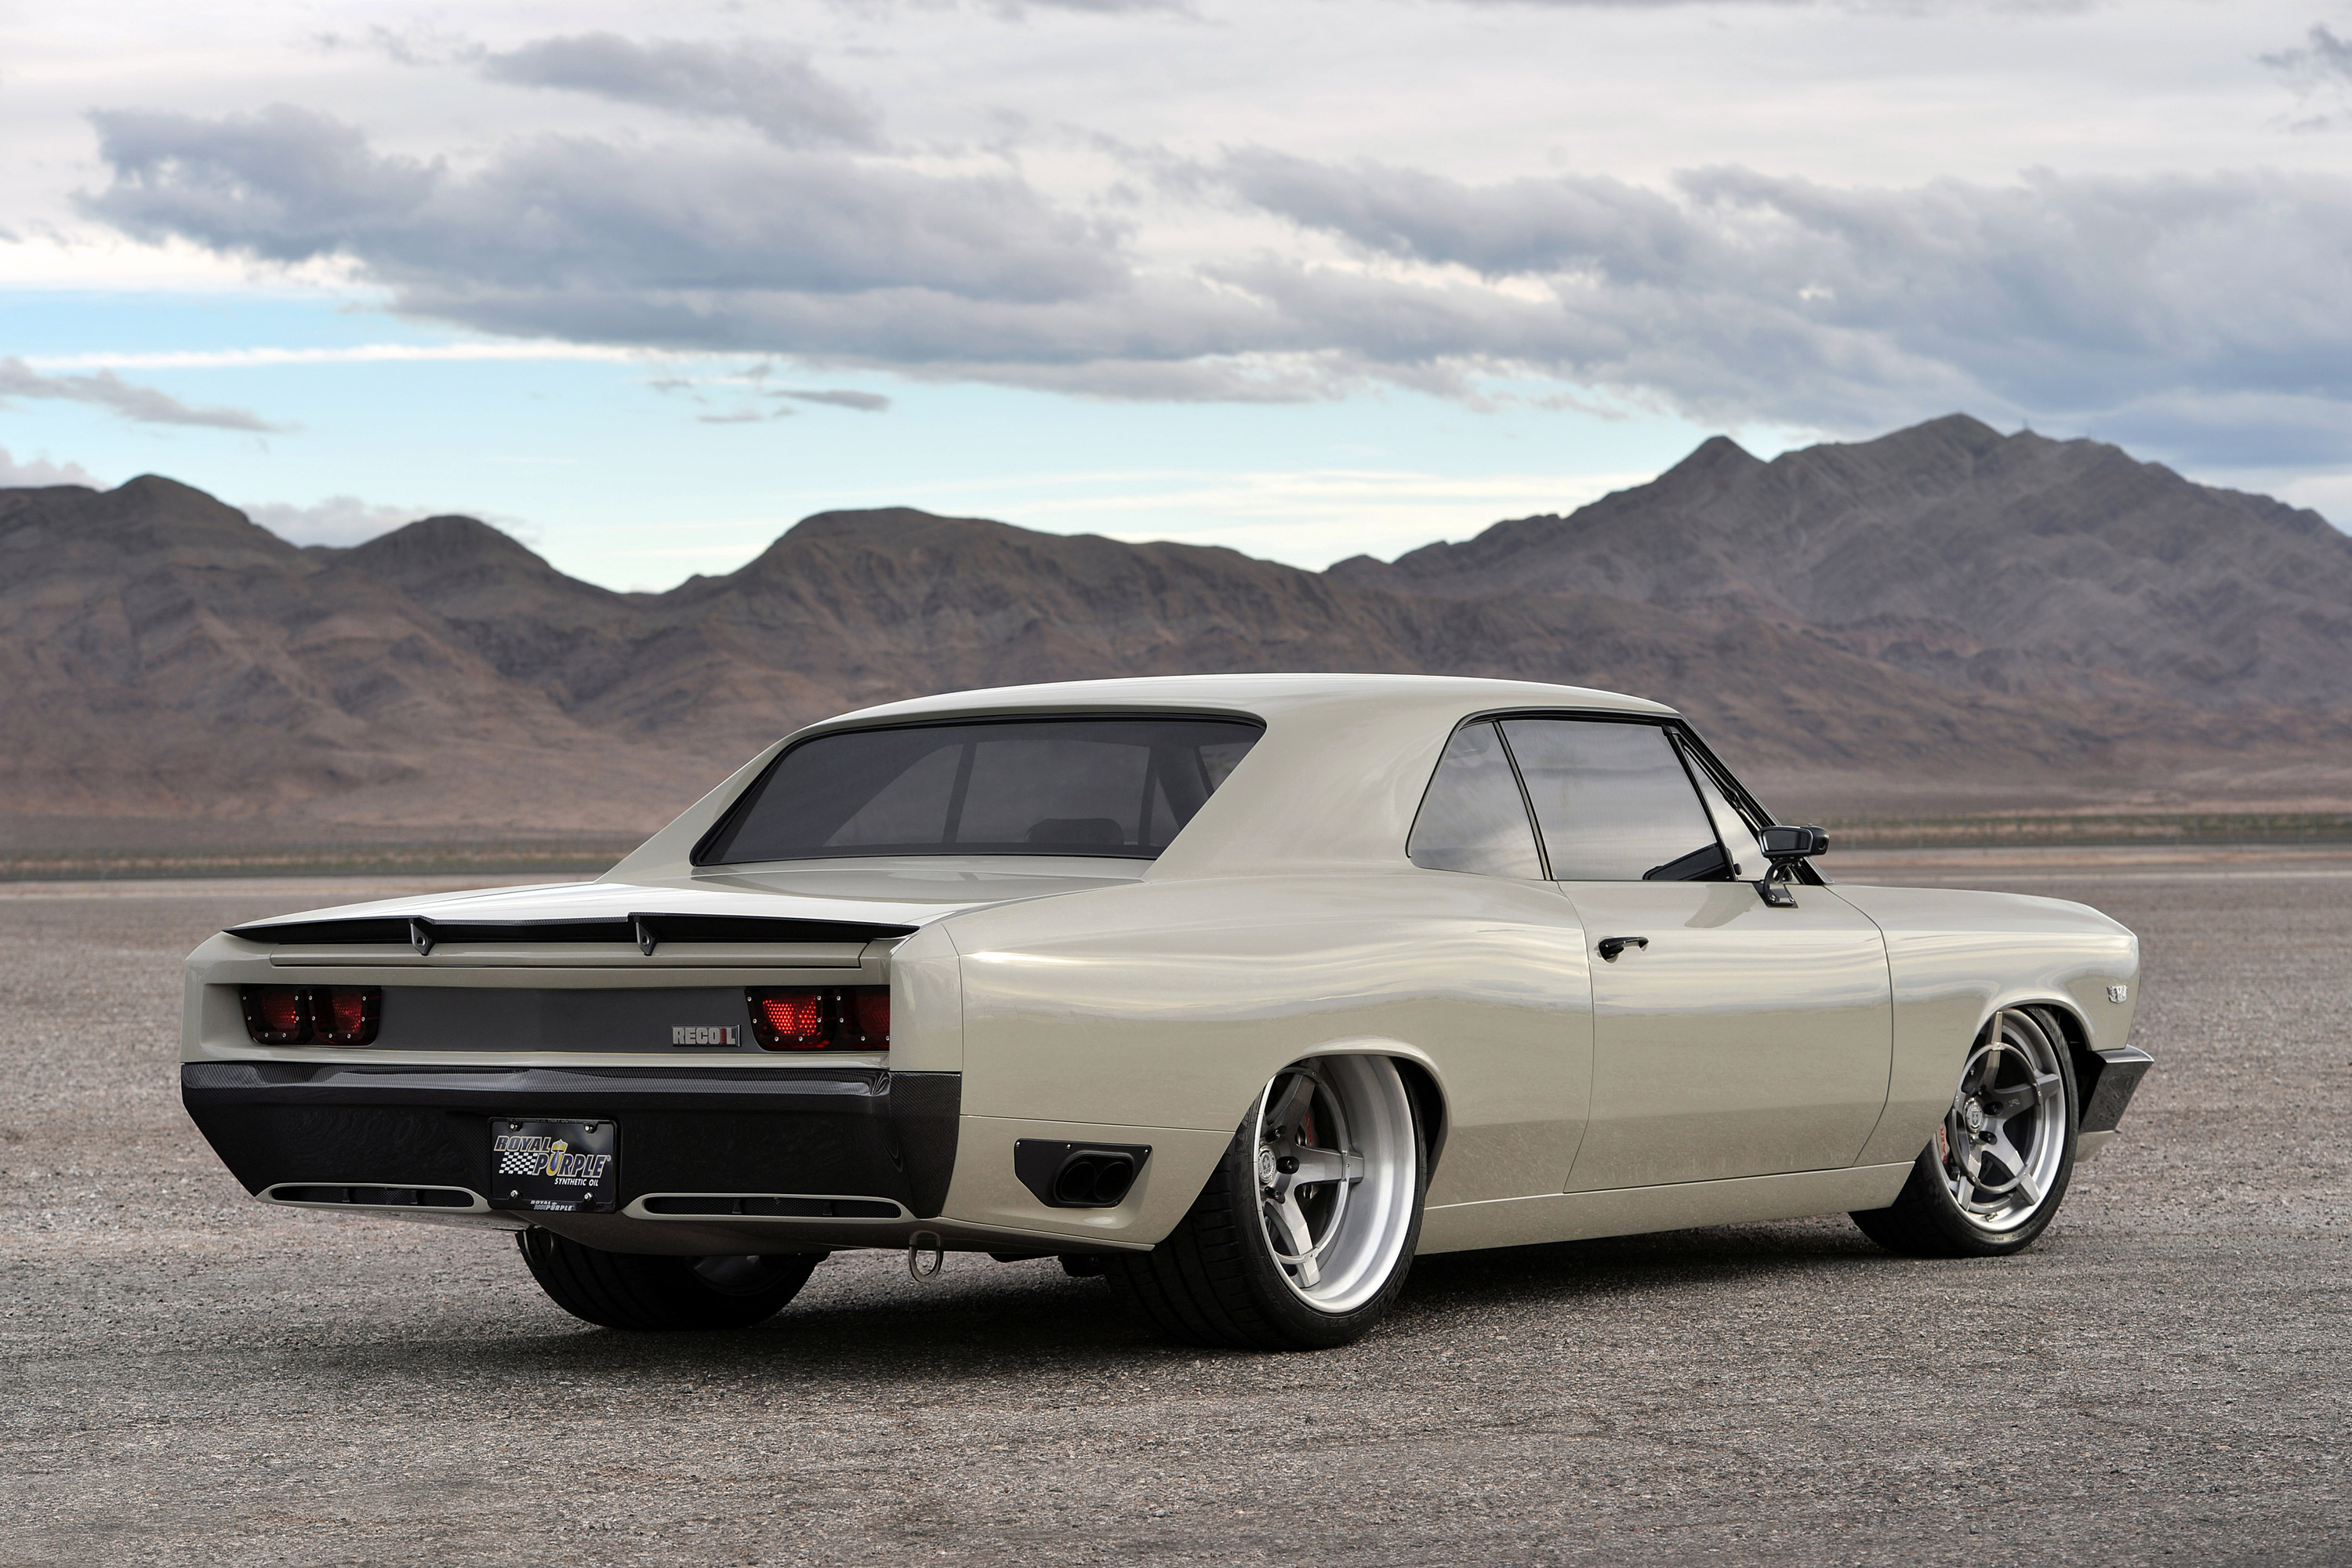 vehicles, chevrolet chevelle, beige car, car, chevrolet chevelle recoil, muscle car, ringbrothers, chevrolet UHD